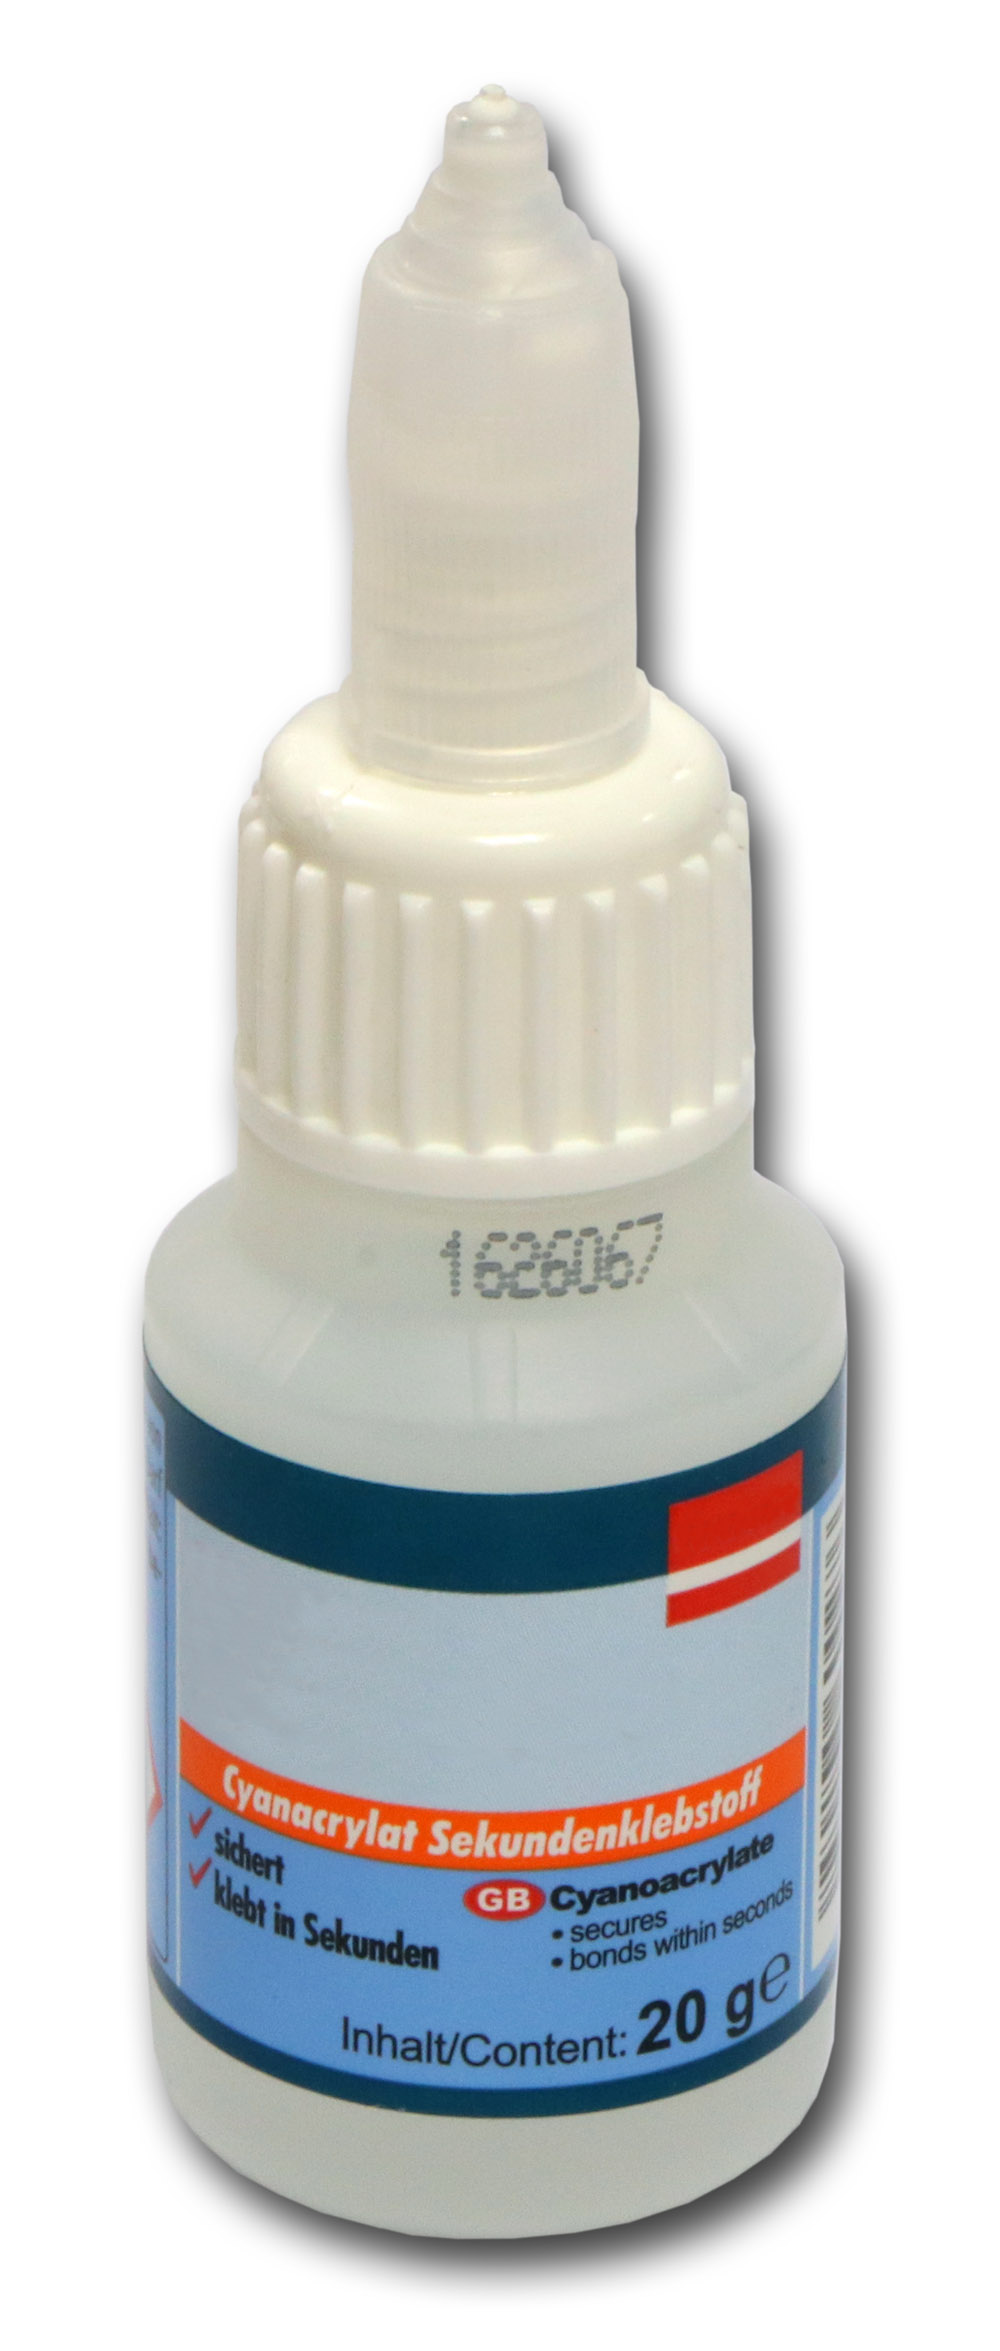 Colle cyanoacrylate cosmo 20g pour coller embout alu, raccord